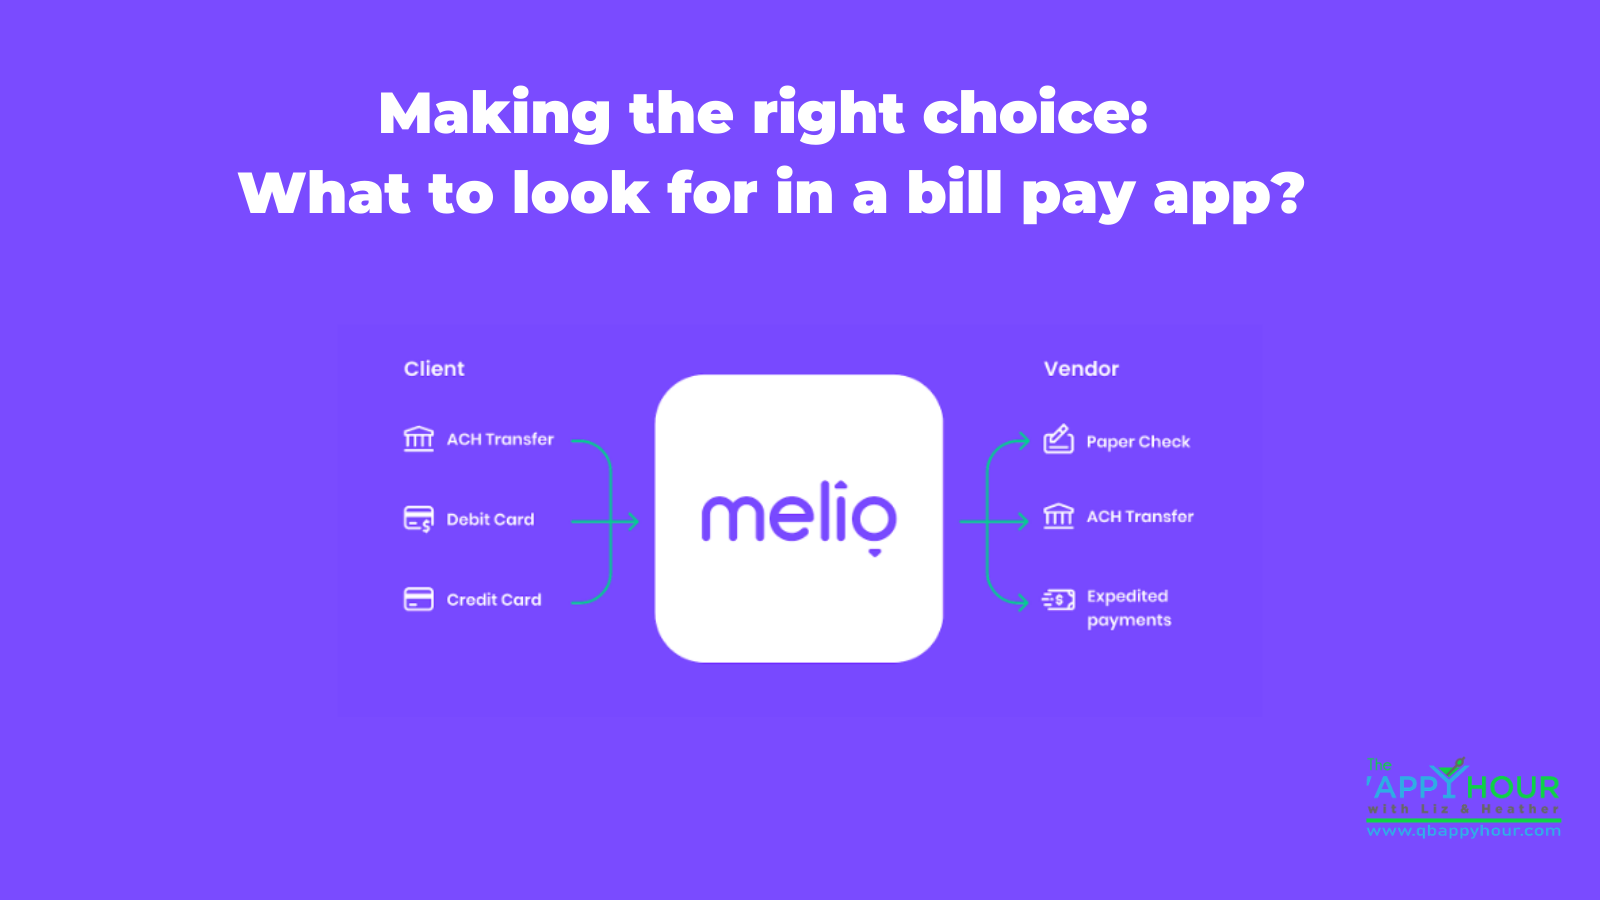 Making the right choice: what to look for in a bill pay app?